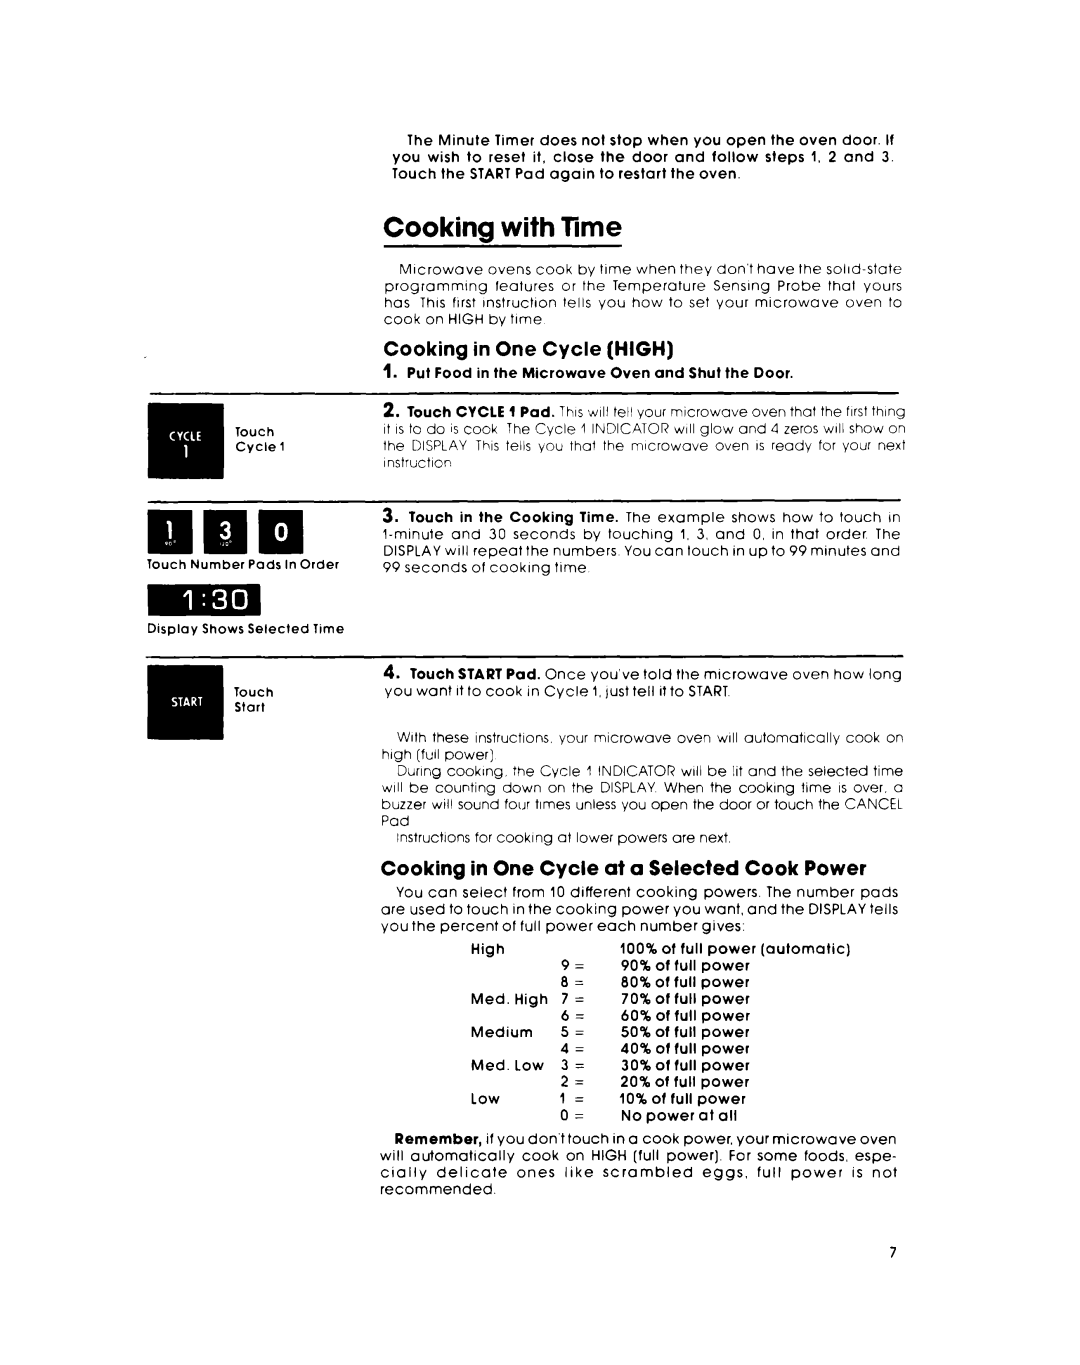 Whirlpool RJM 7800 manual Cooking with Time, Cooking in One Cycle HIGH, Cooking in One Cycle at a Selected Cook Power 